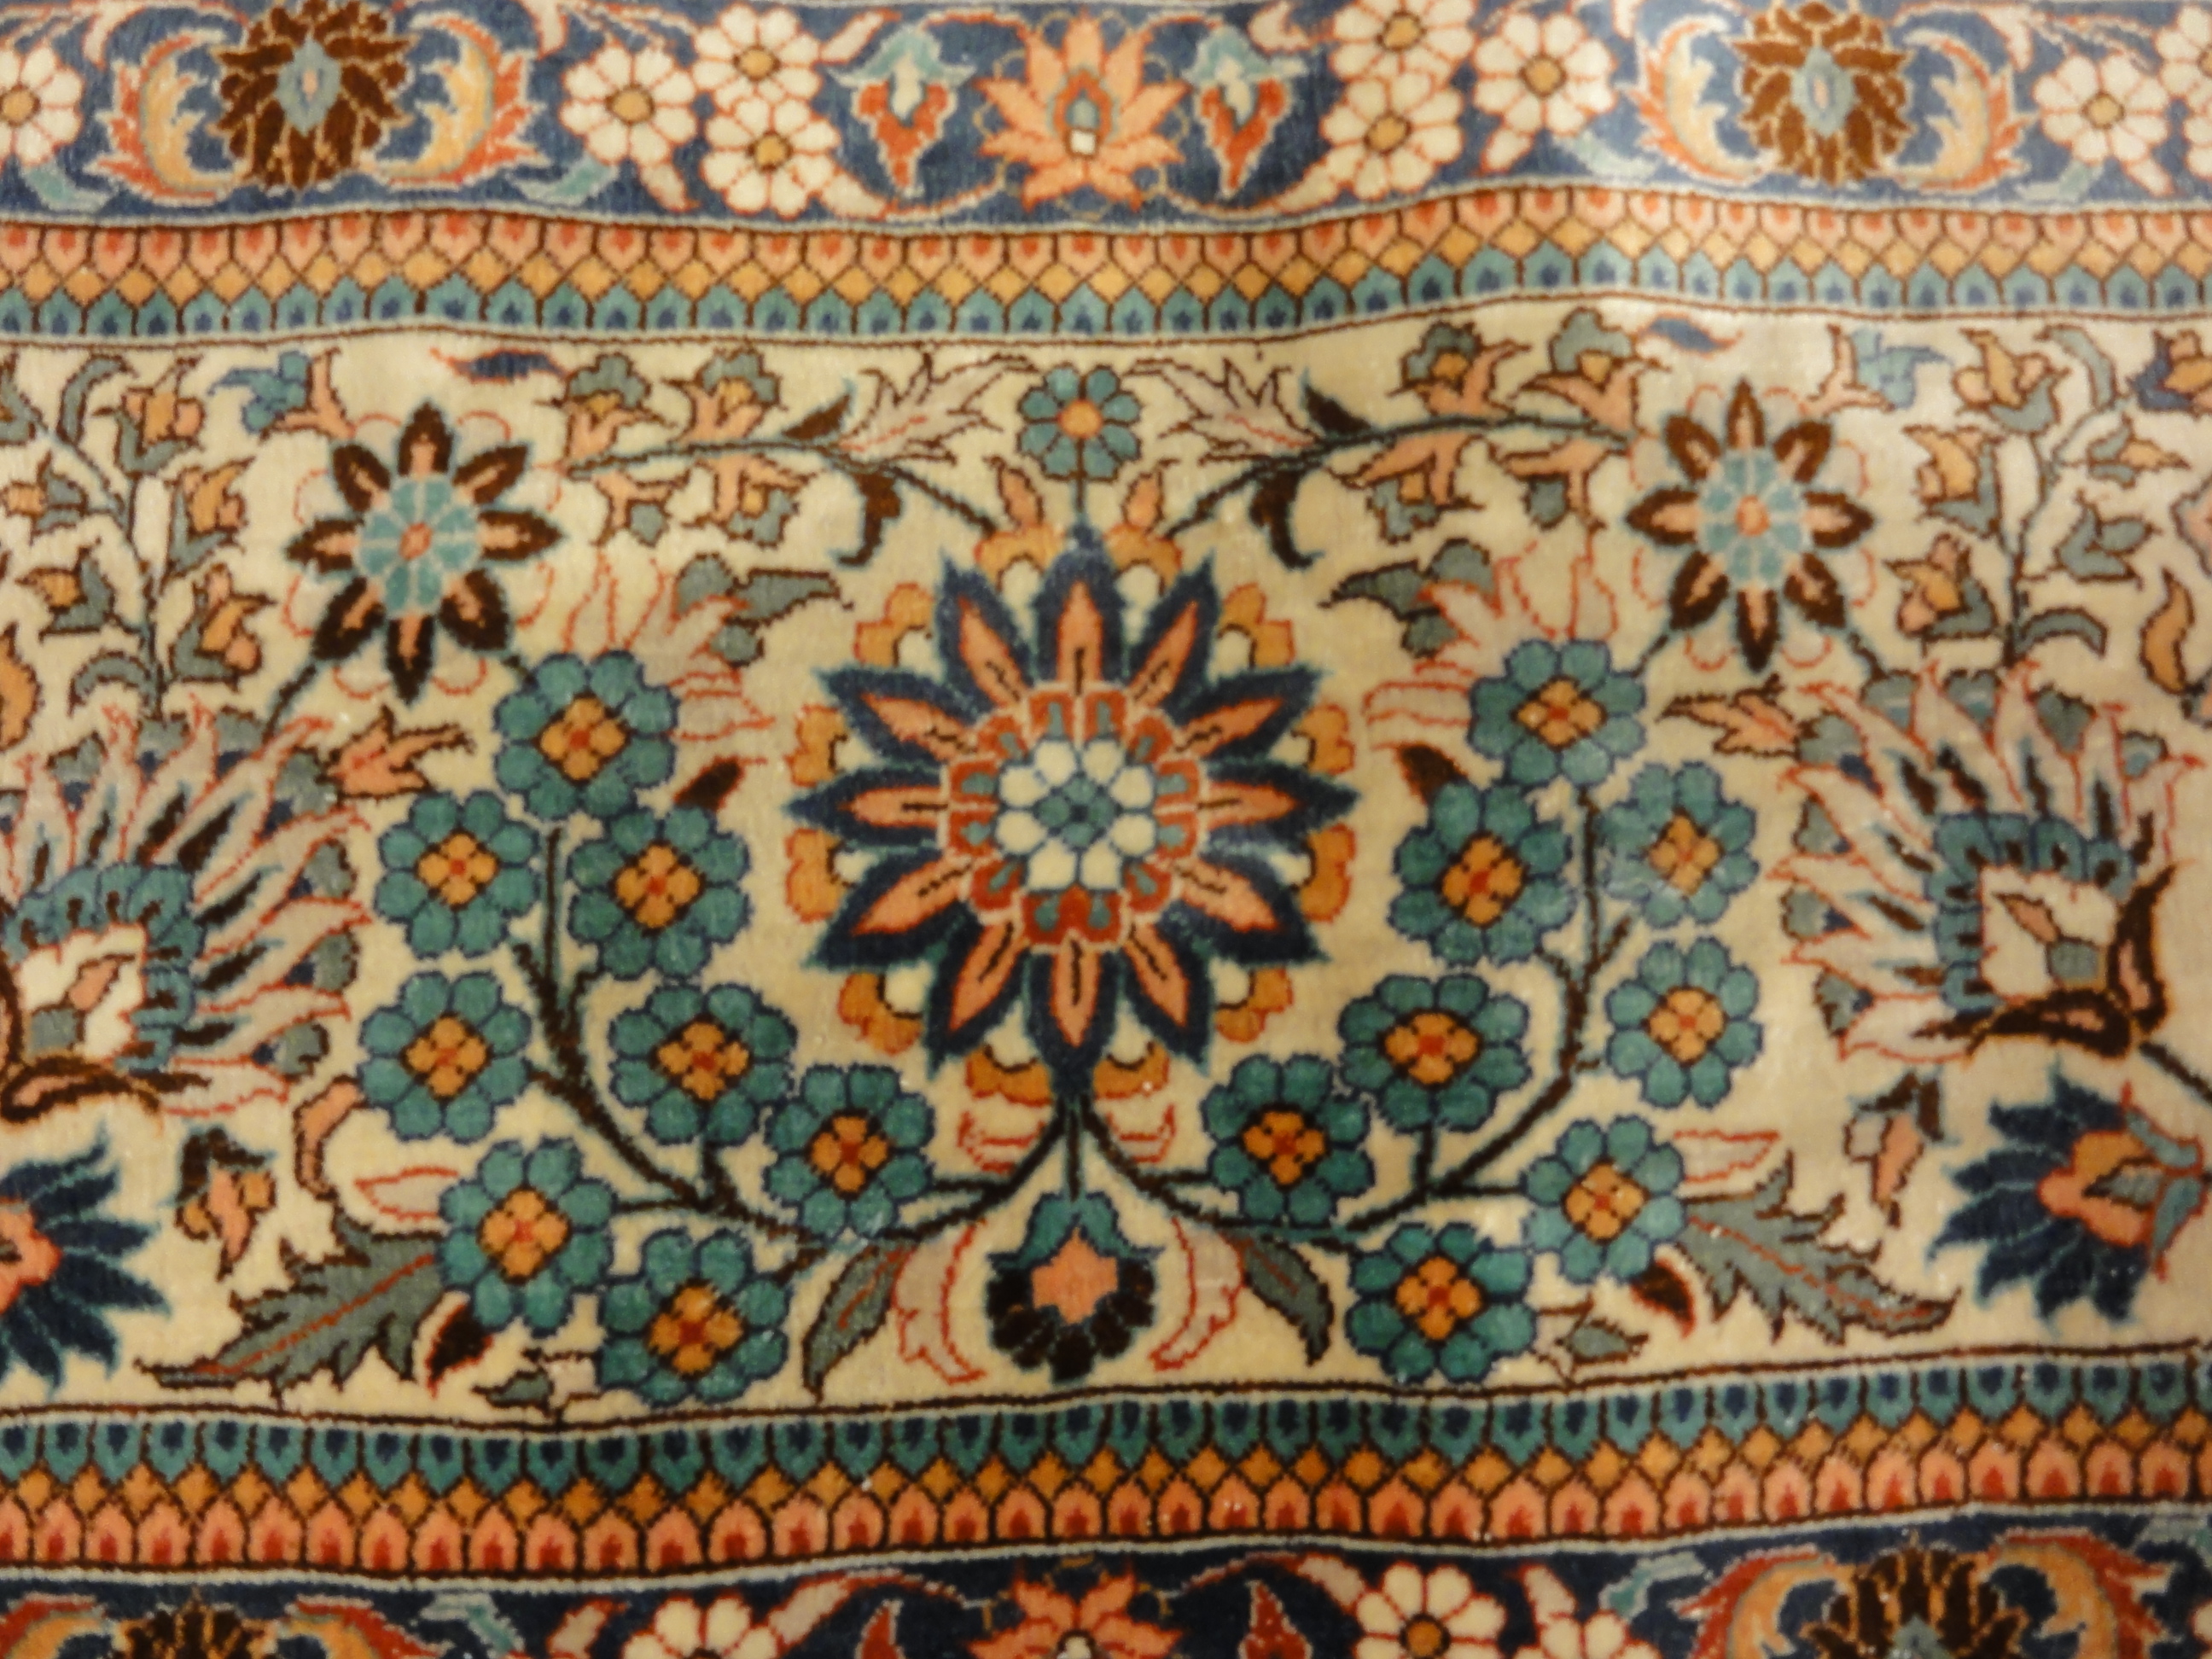 An antique finest silk rug featuring the garden of paradise with 1001 flowers. A piece of genuine woven carpet art sold at Santa Barbara Design Center.